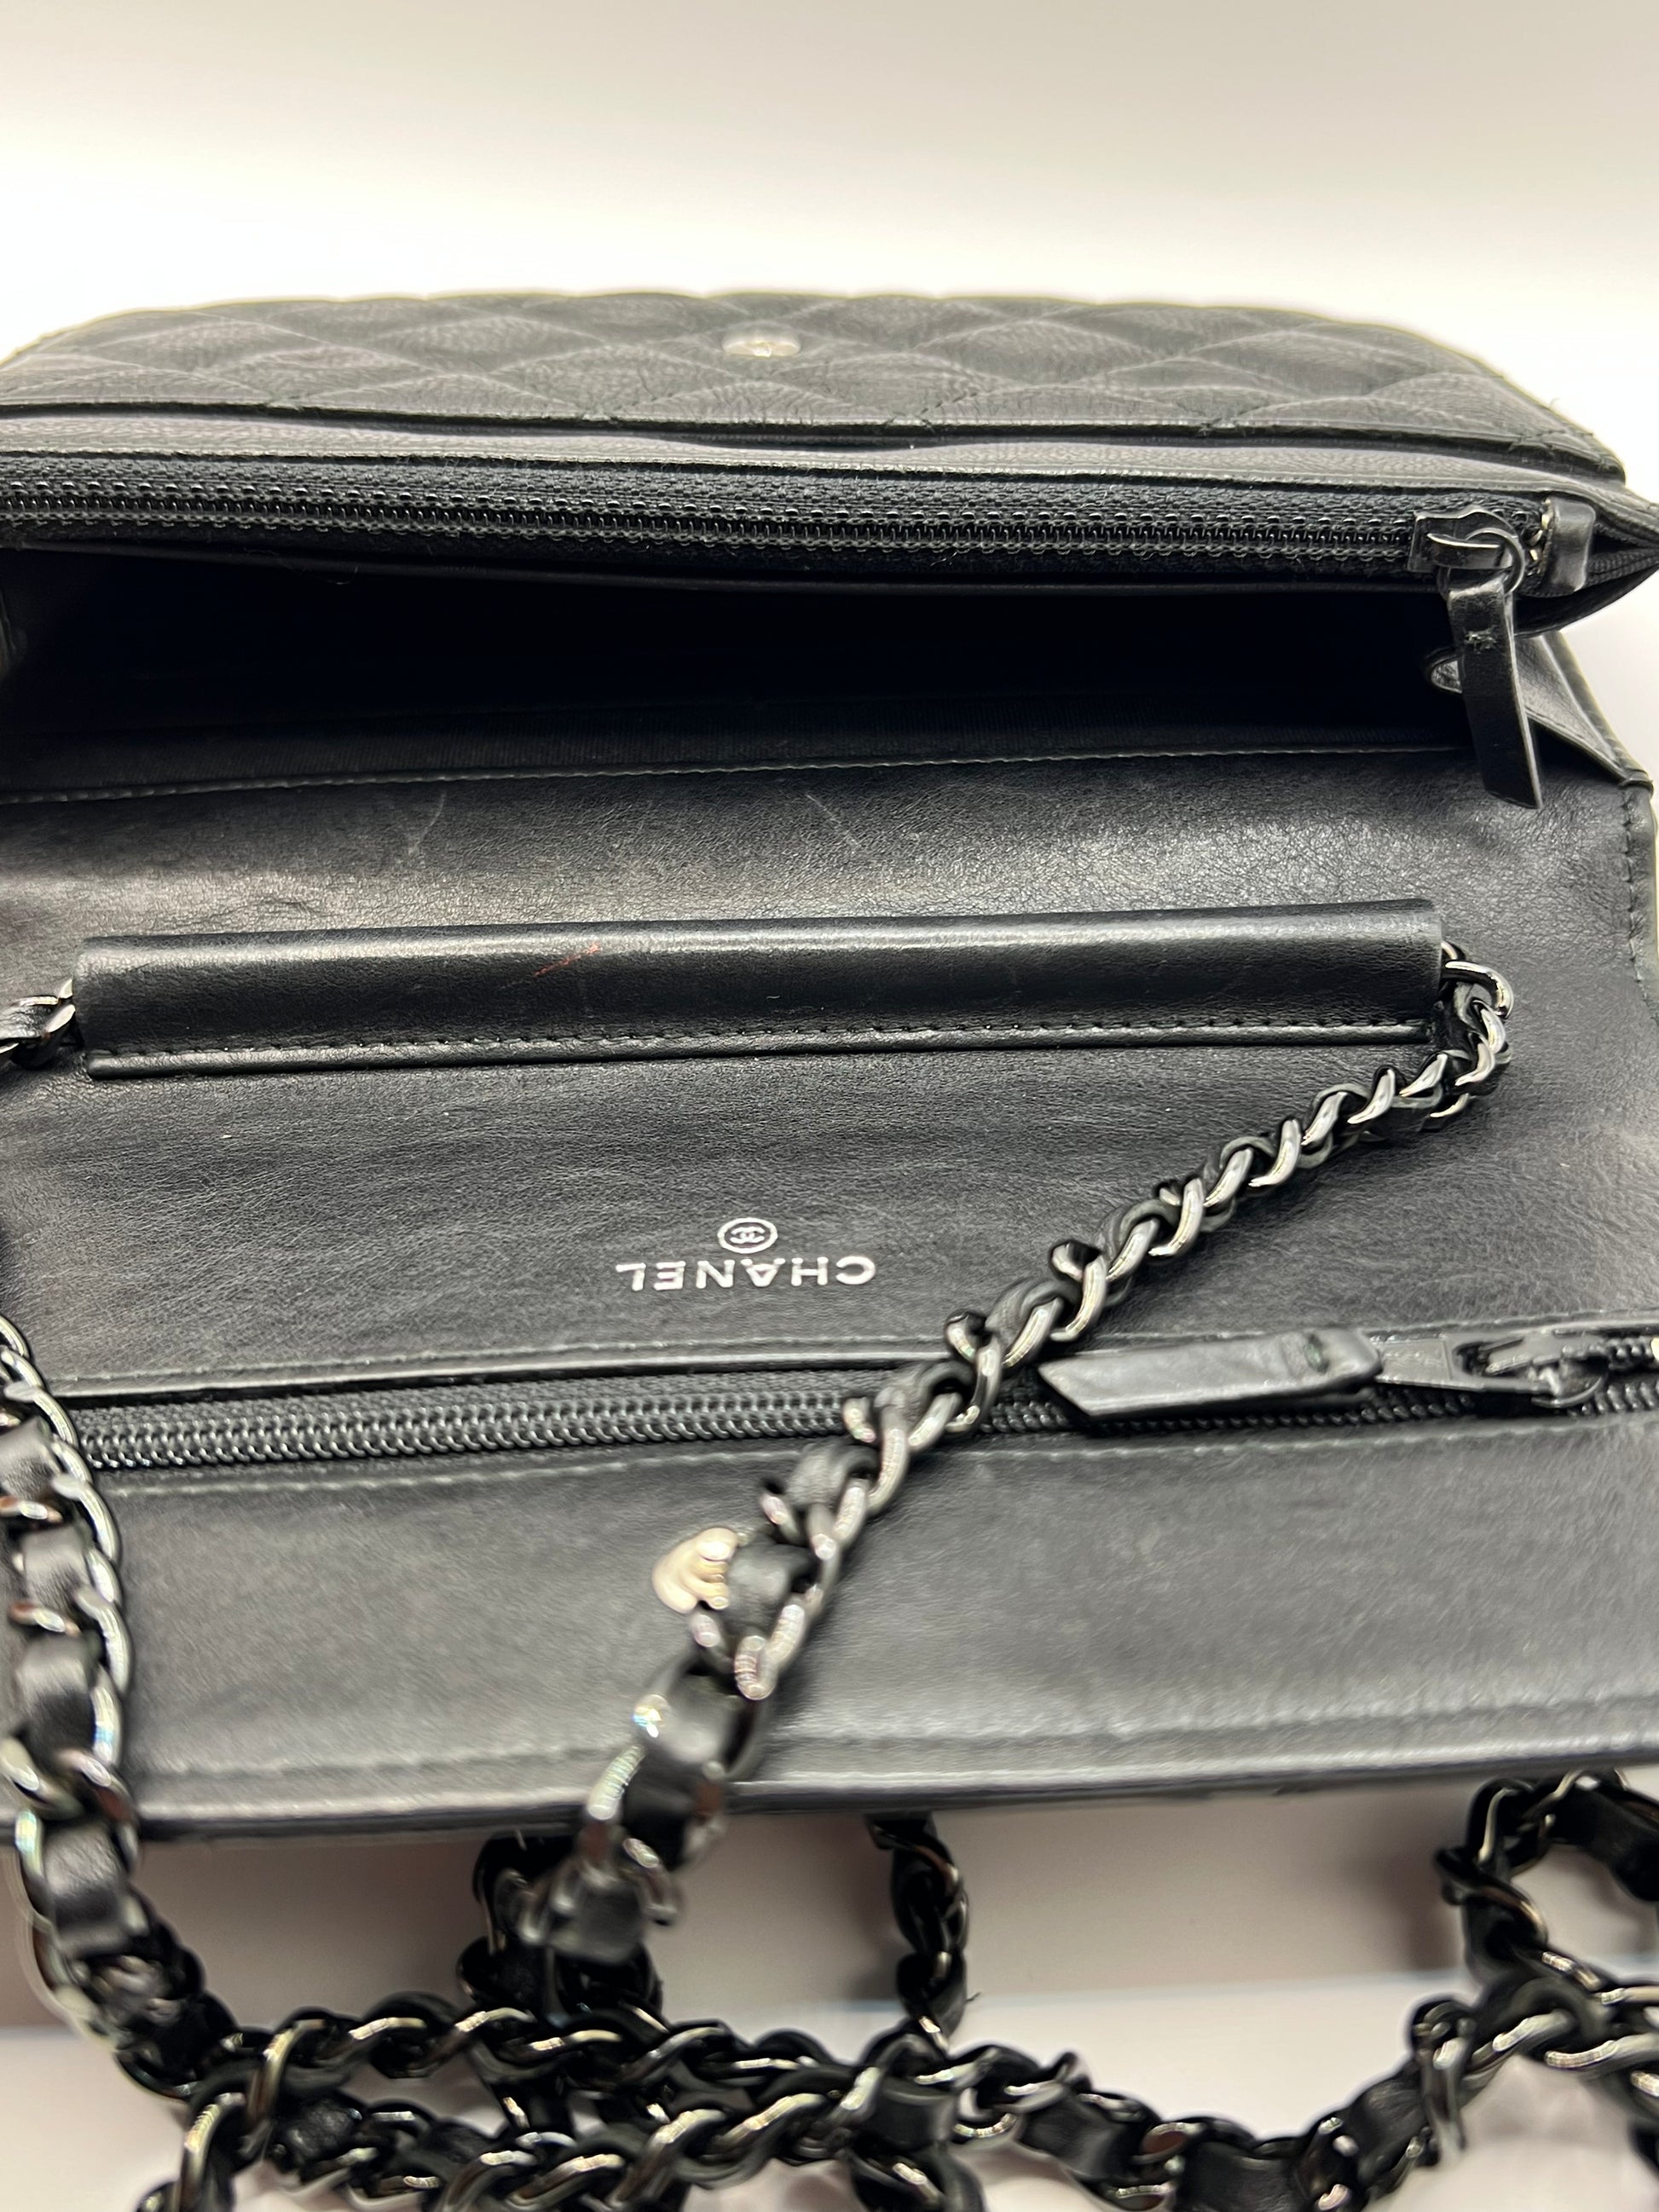 Chanel, Wallet on Chain, How to Shorten Chain